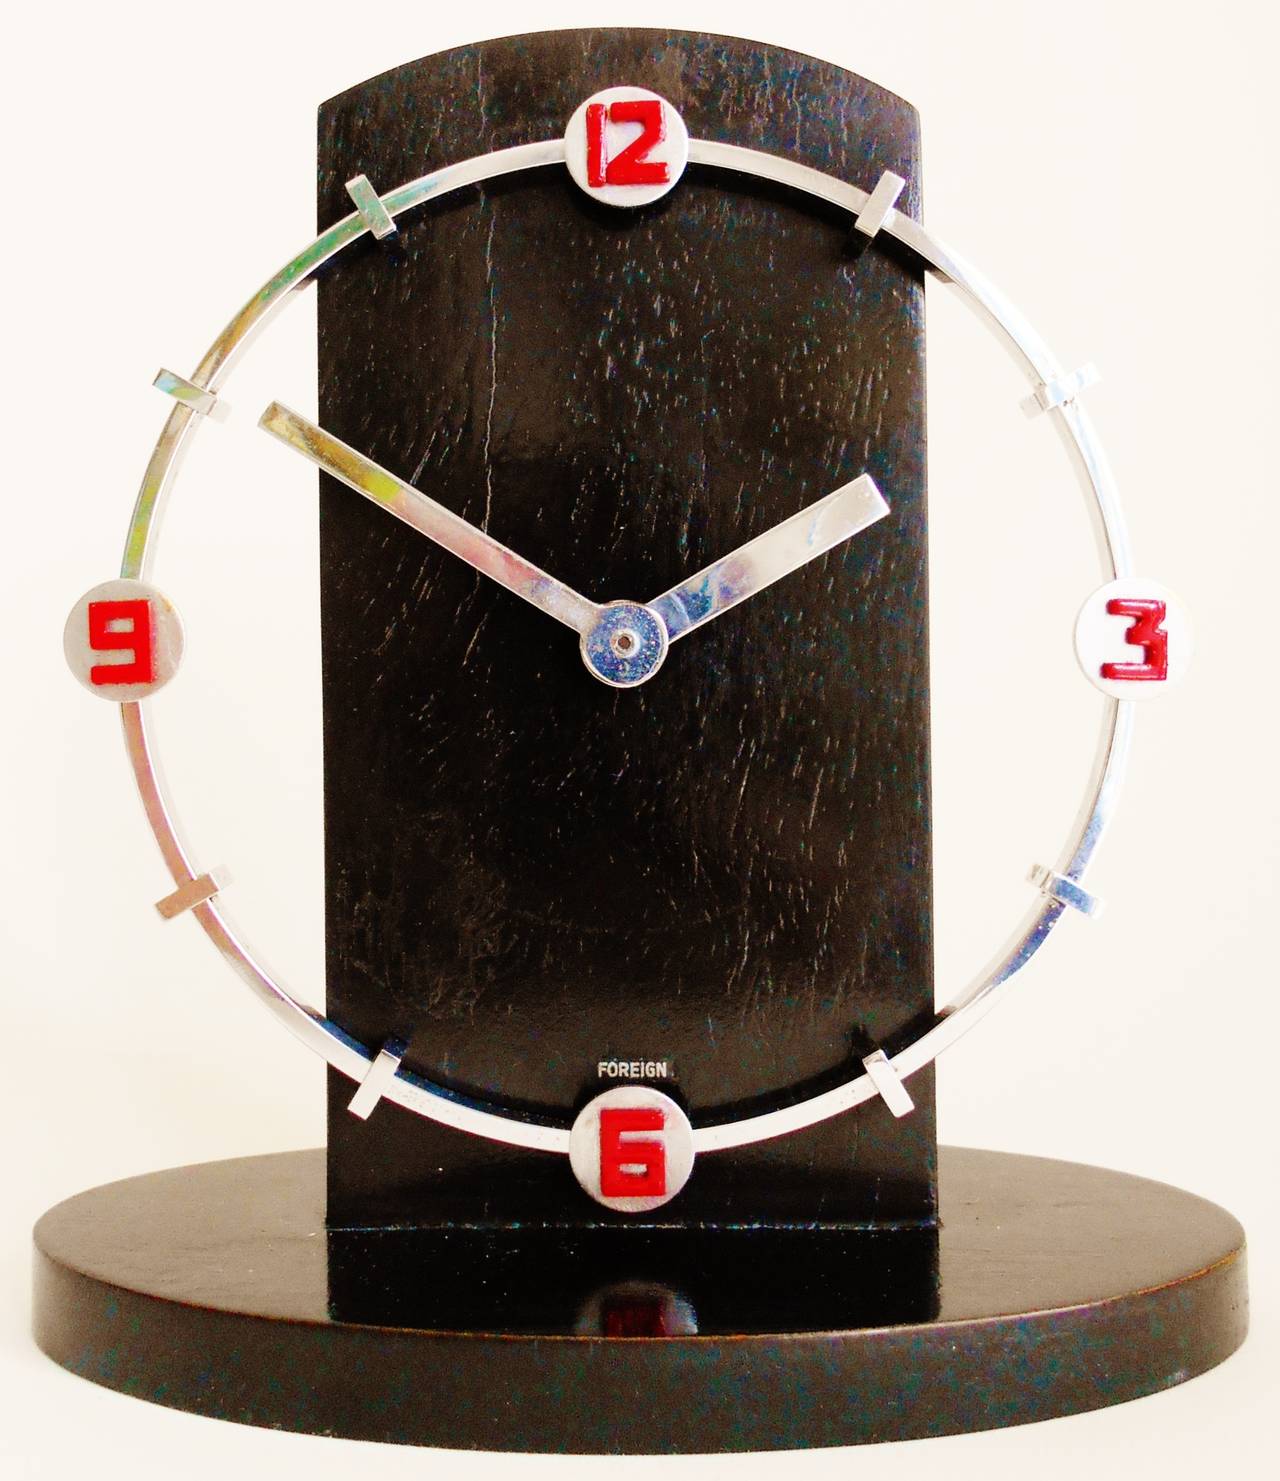 This stunning German Art Deco shelf clock features a ring of original chrome plated metal. This displays each of the quarter hour numerals in red enamel and backed by small chrome disks with the other numerals represented by small chrome bars. The